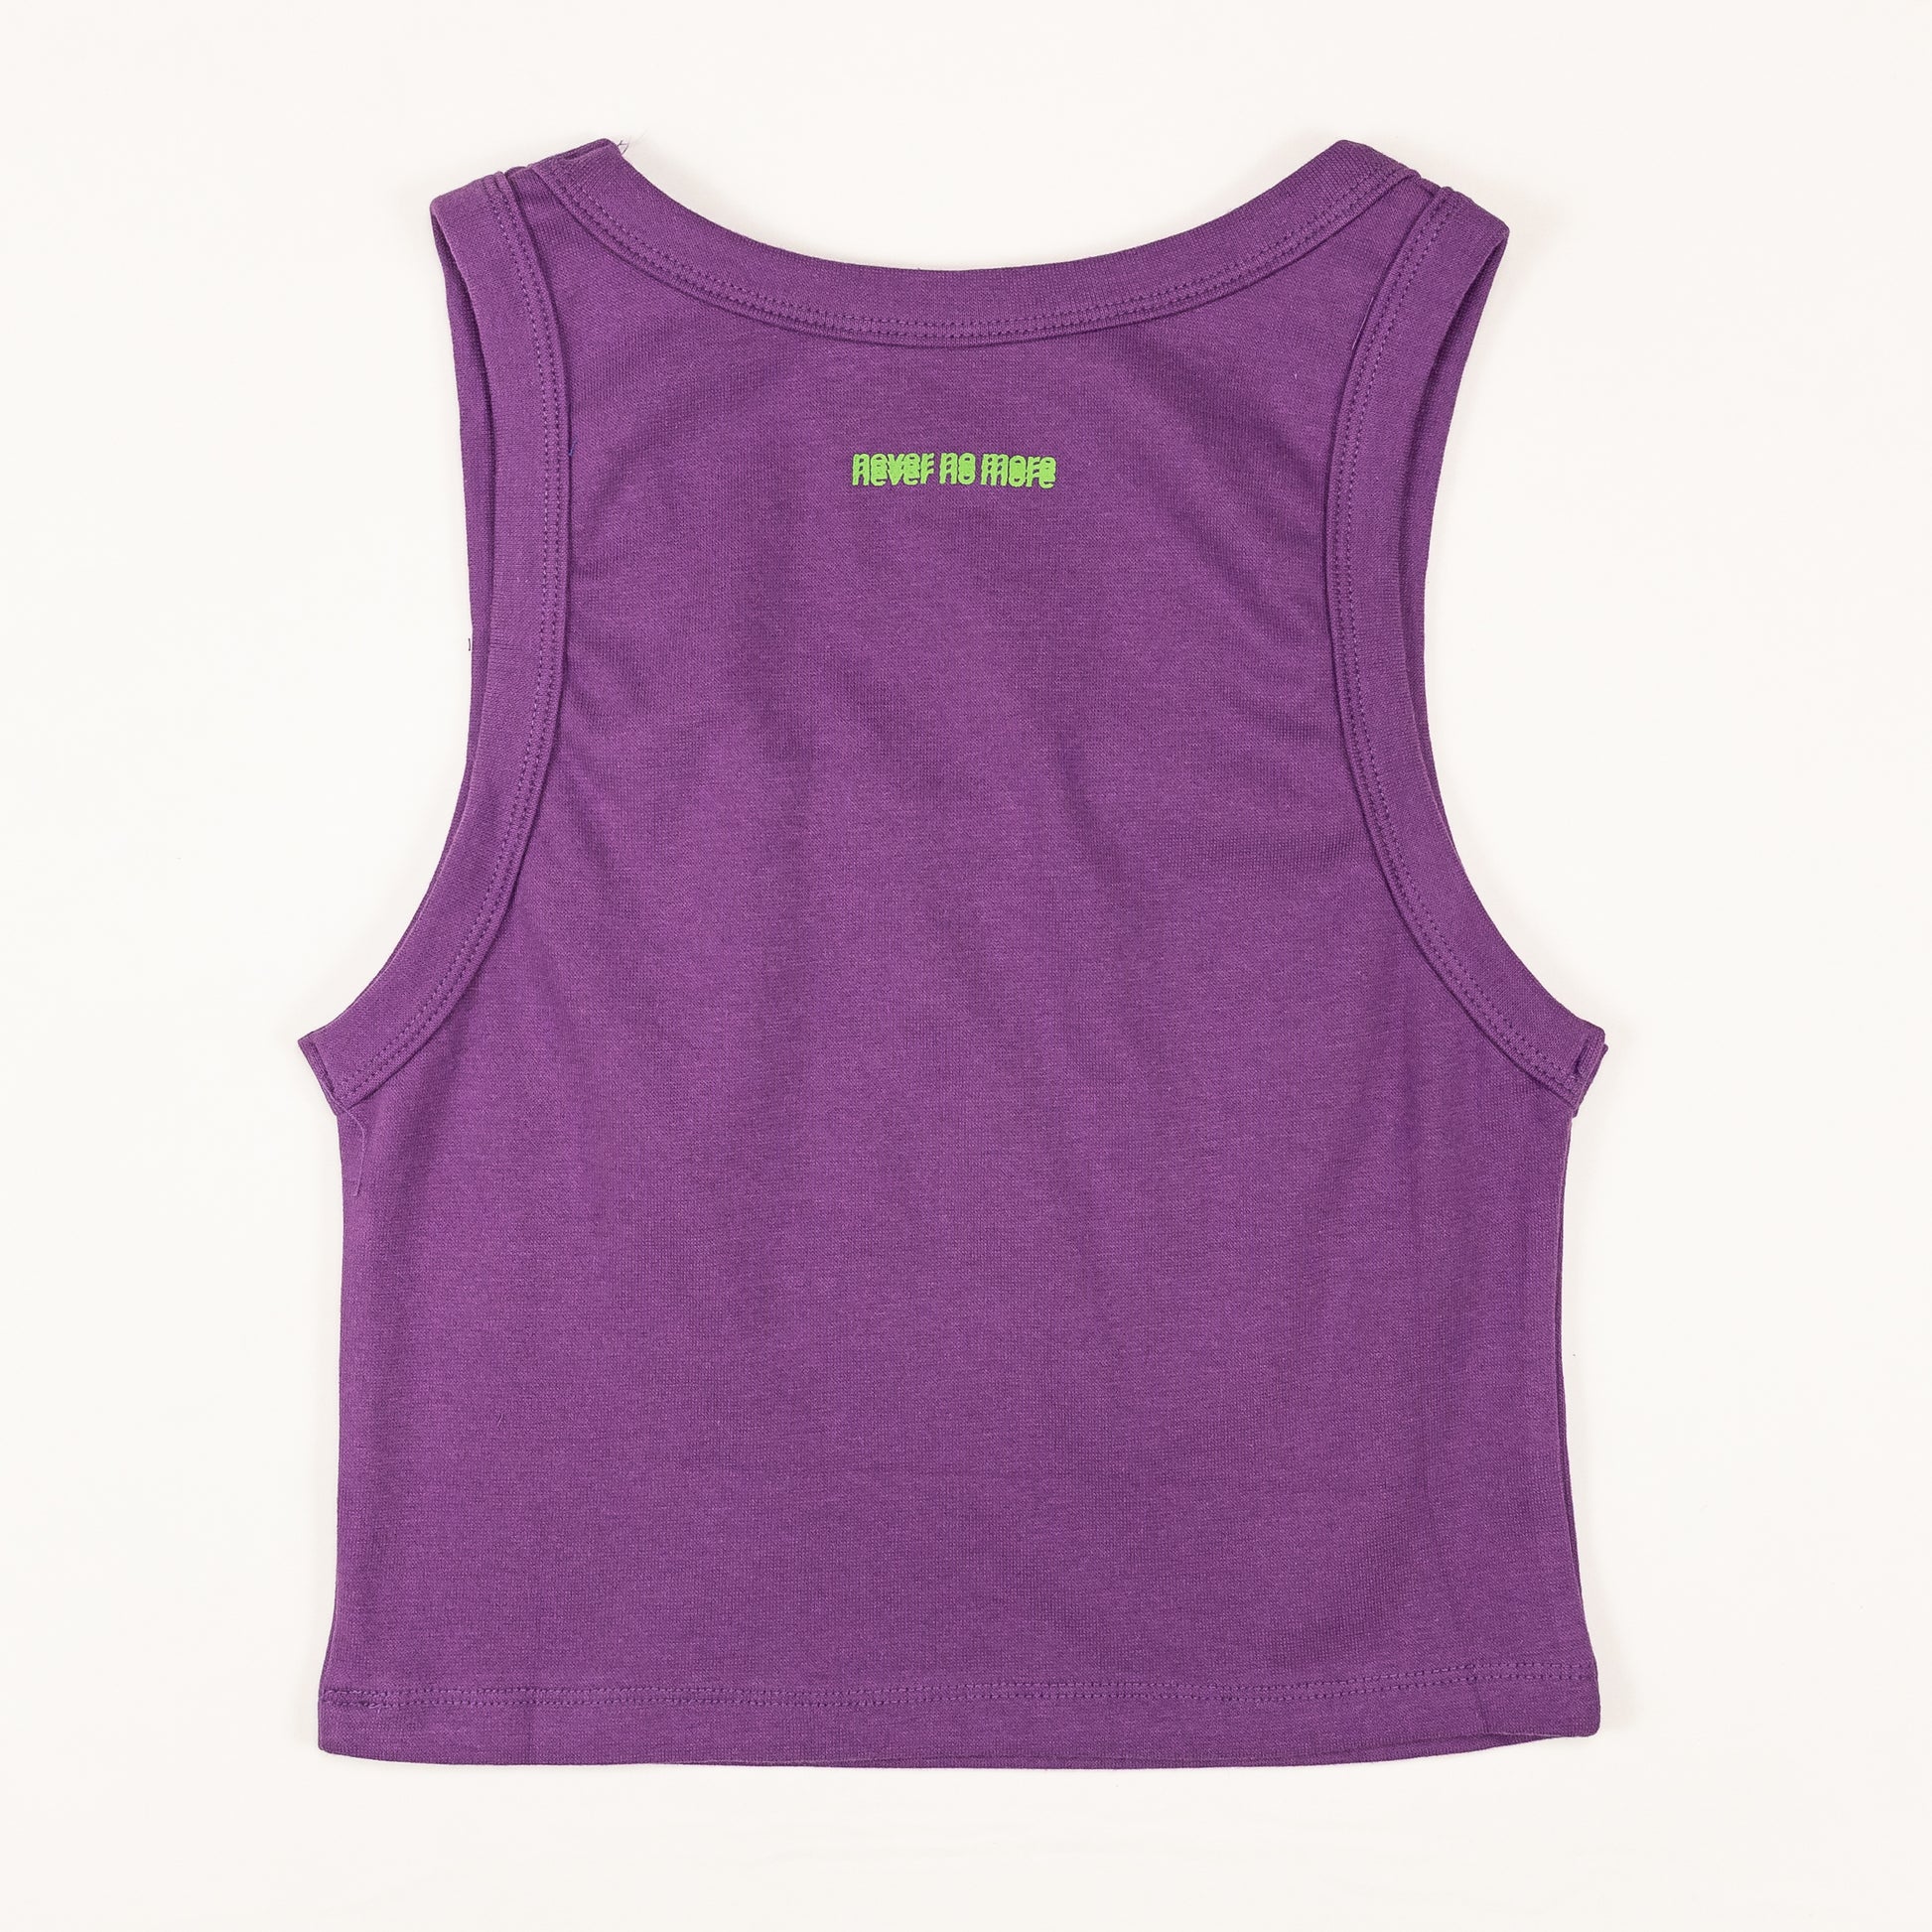 Womens Flying Duck Tank, Purple - Layr Official